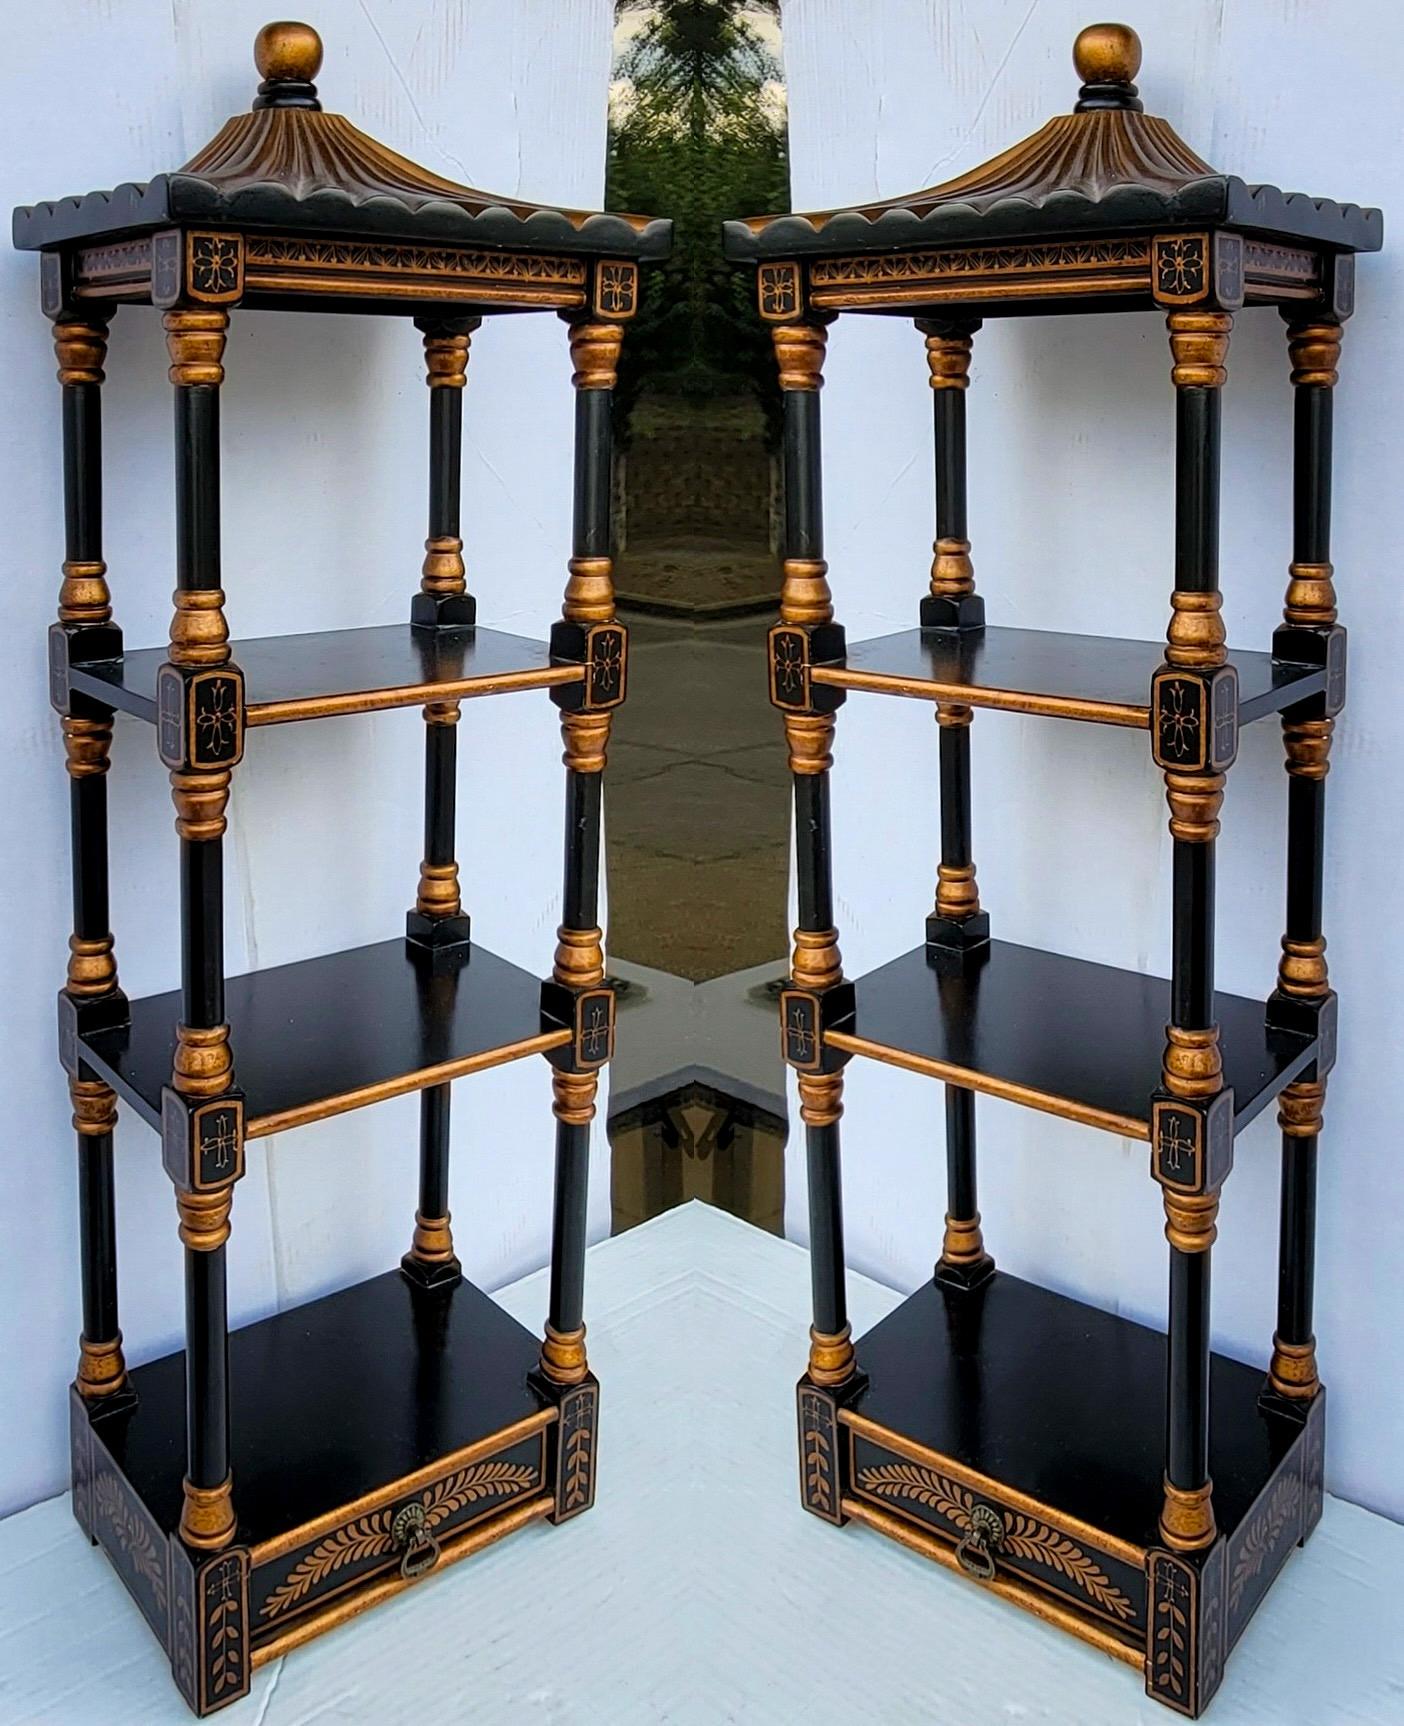 This is a late 20th century pair of chinoiserie pagoda form wall shelves. They have a single drawer and are black with gilt accents. Shelf depth is 7.75”. Heights from the bottom up are 10”, 8.75”, and 8.5”. 

 